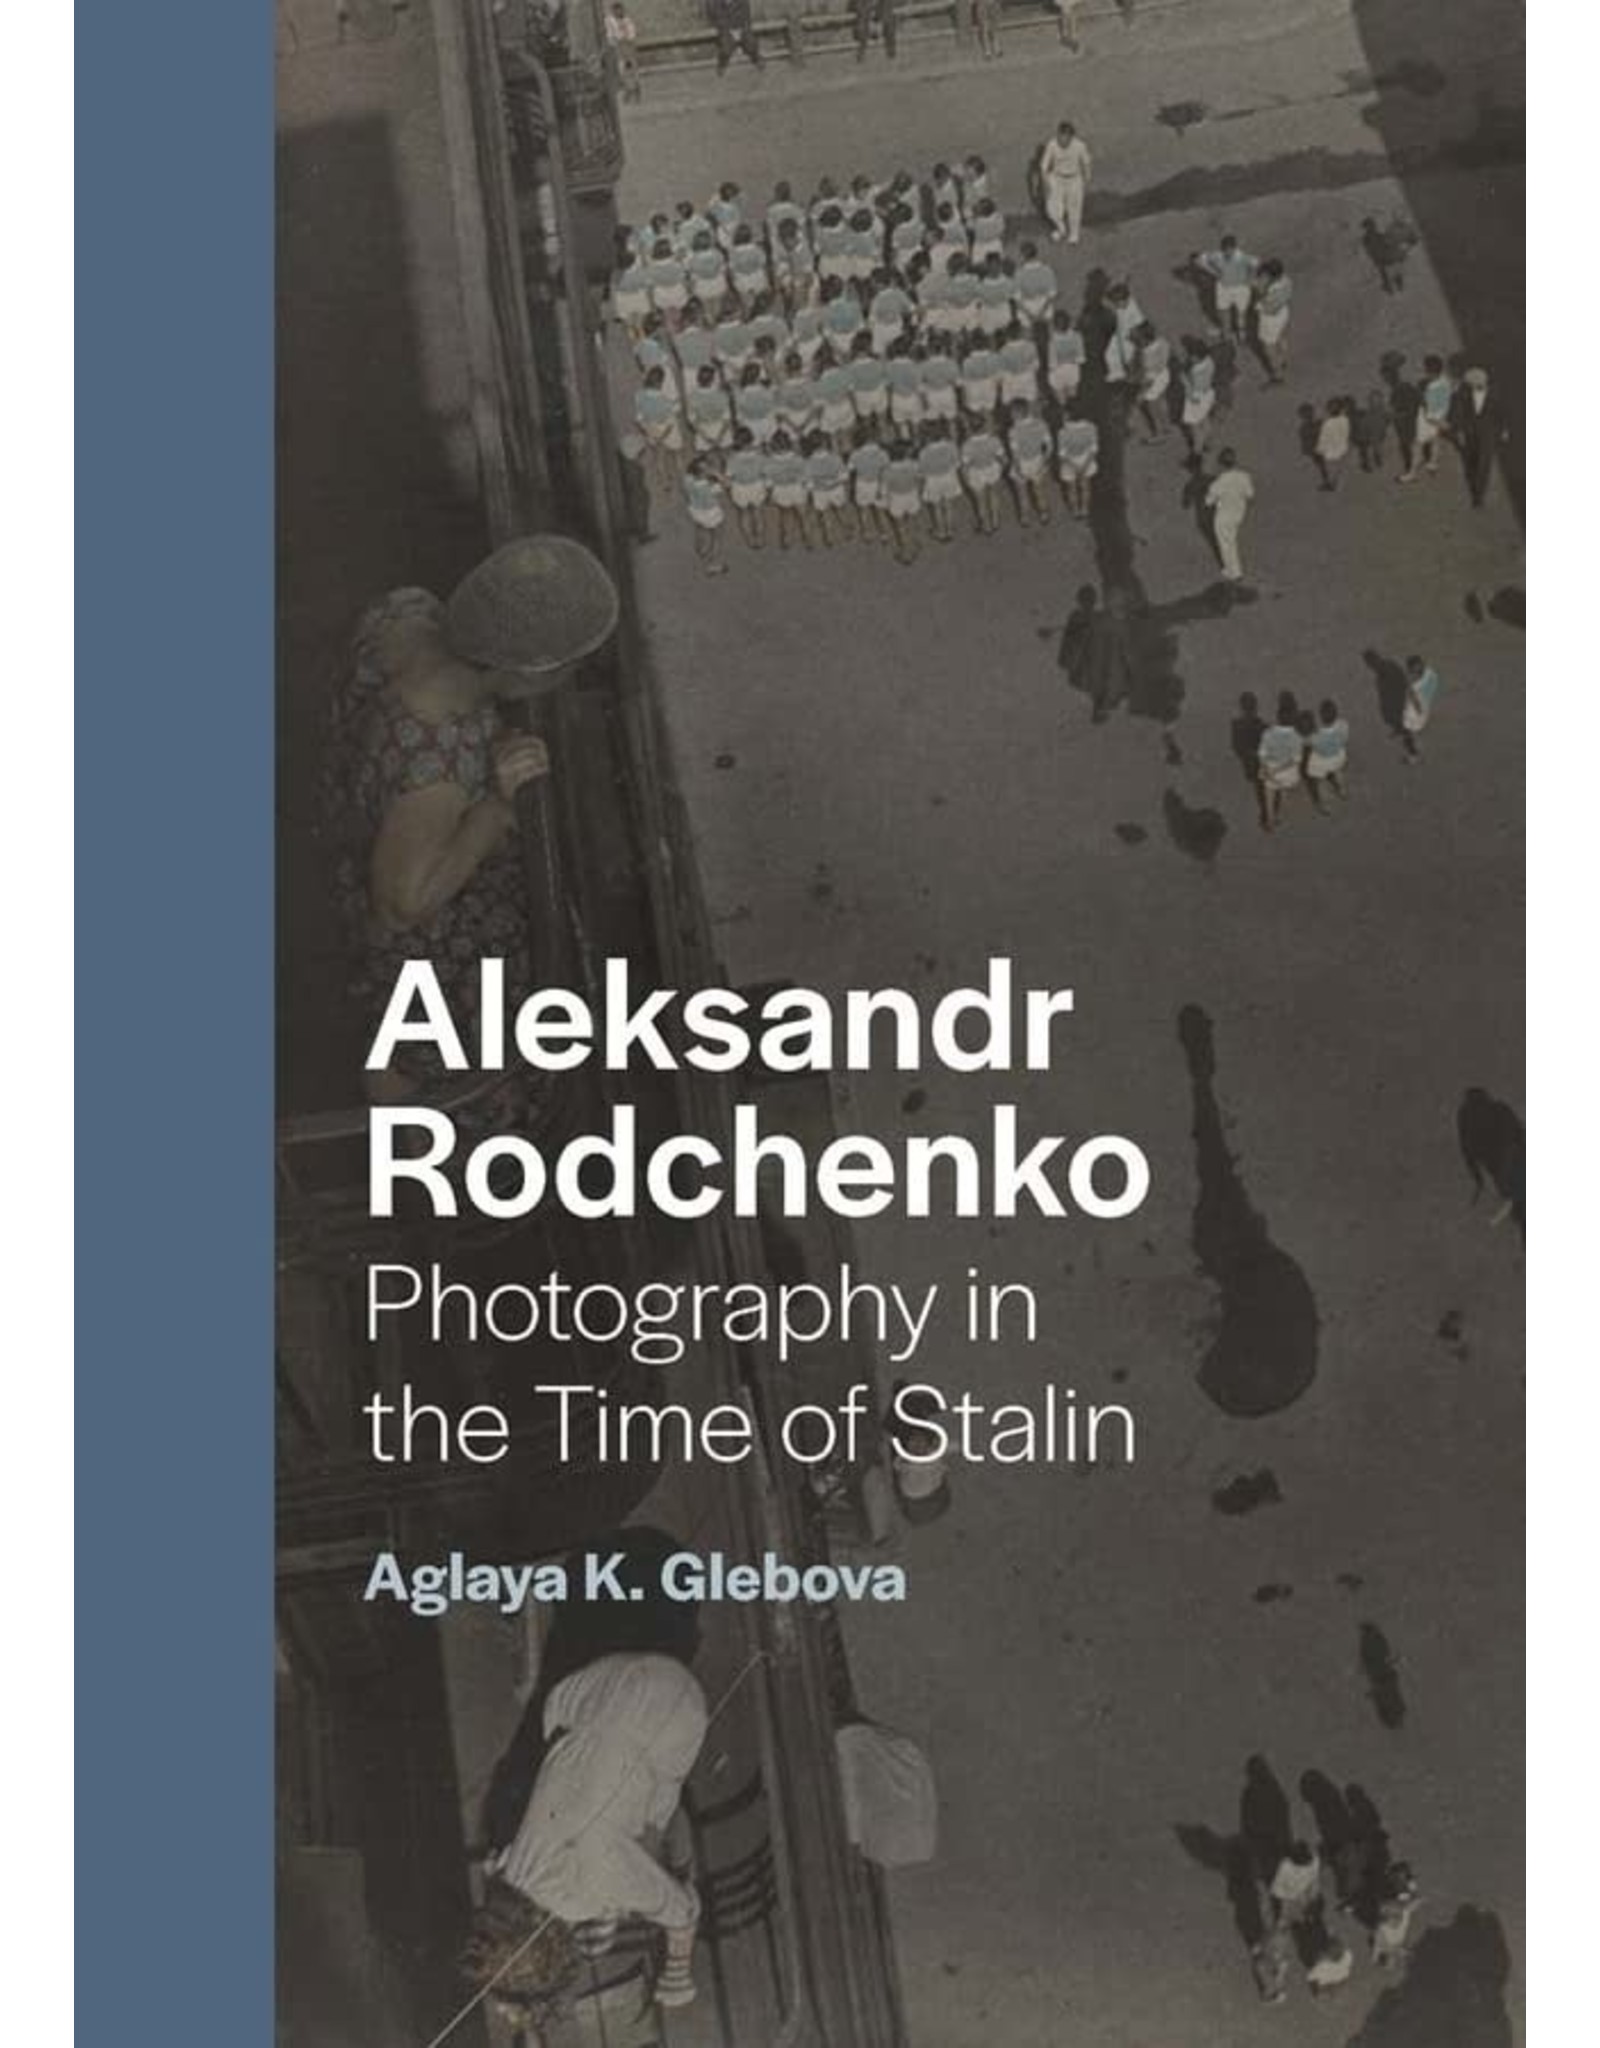 Aleksander Rodchenko: Photography in the Time of Stalin